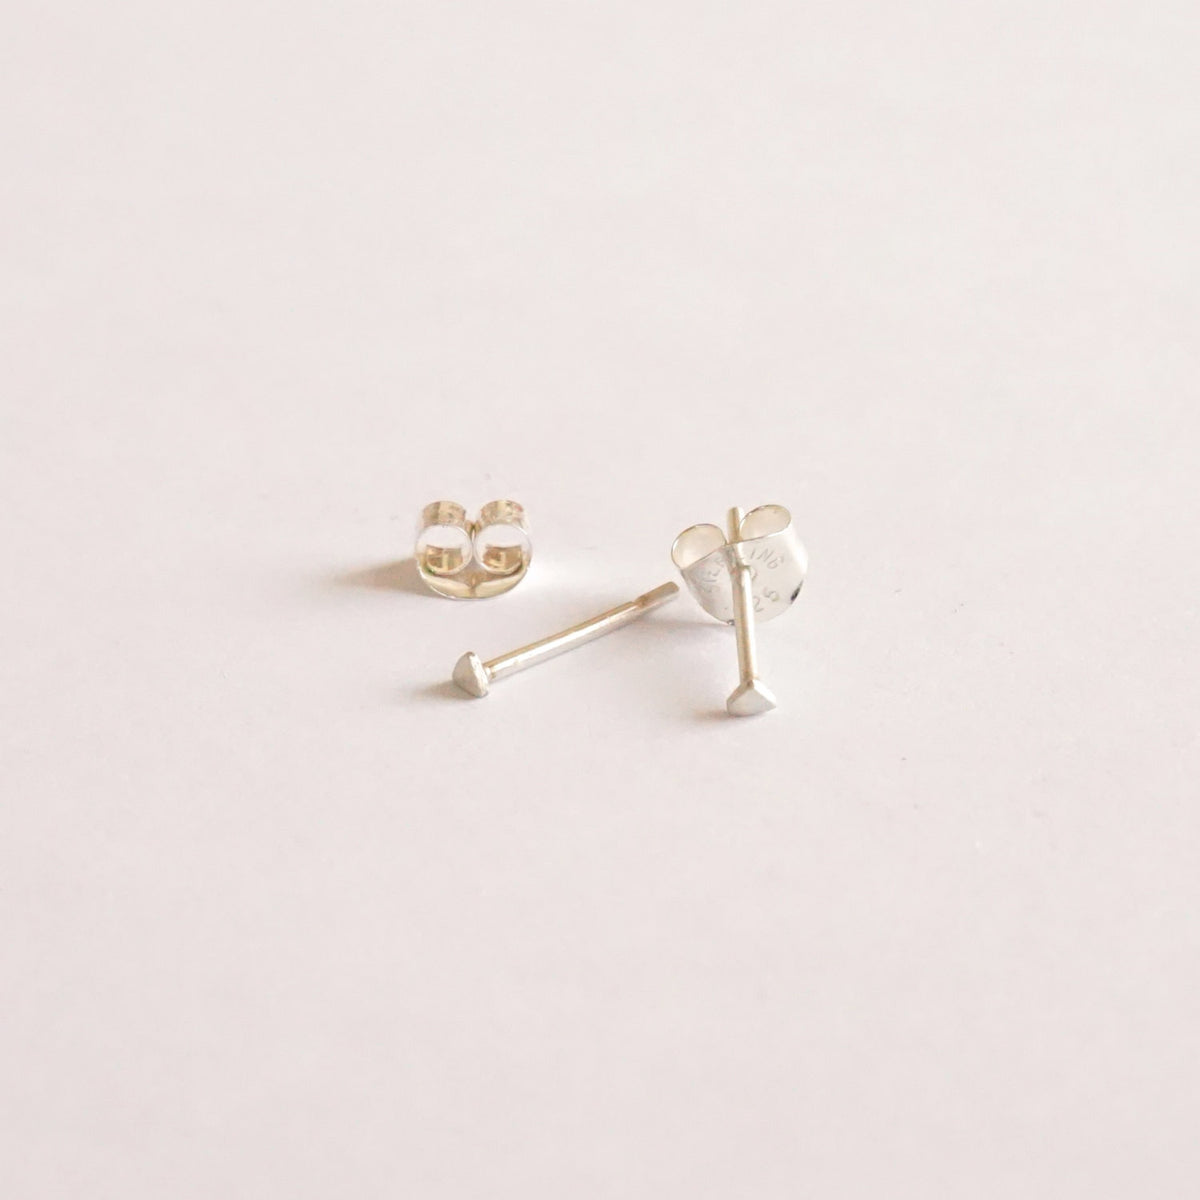 Timeless Hand-Made Sterling Silver or 14K Gold Triangle Stud Earrings - 0200 - Virginia Wynne Designs